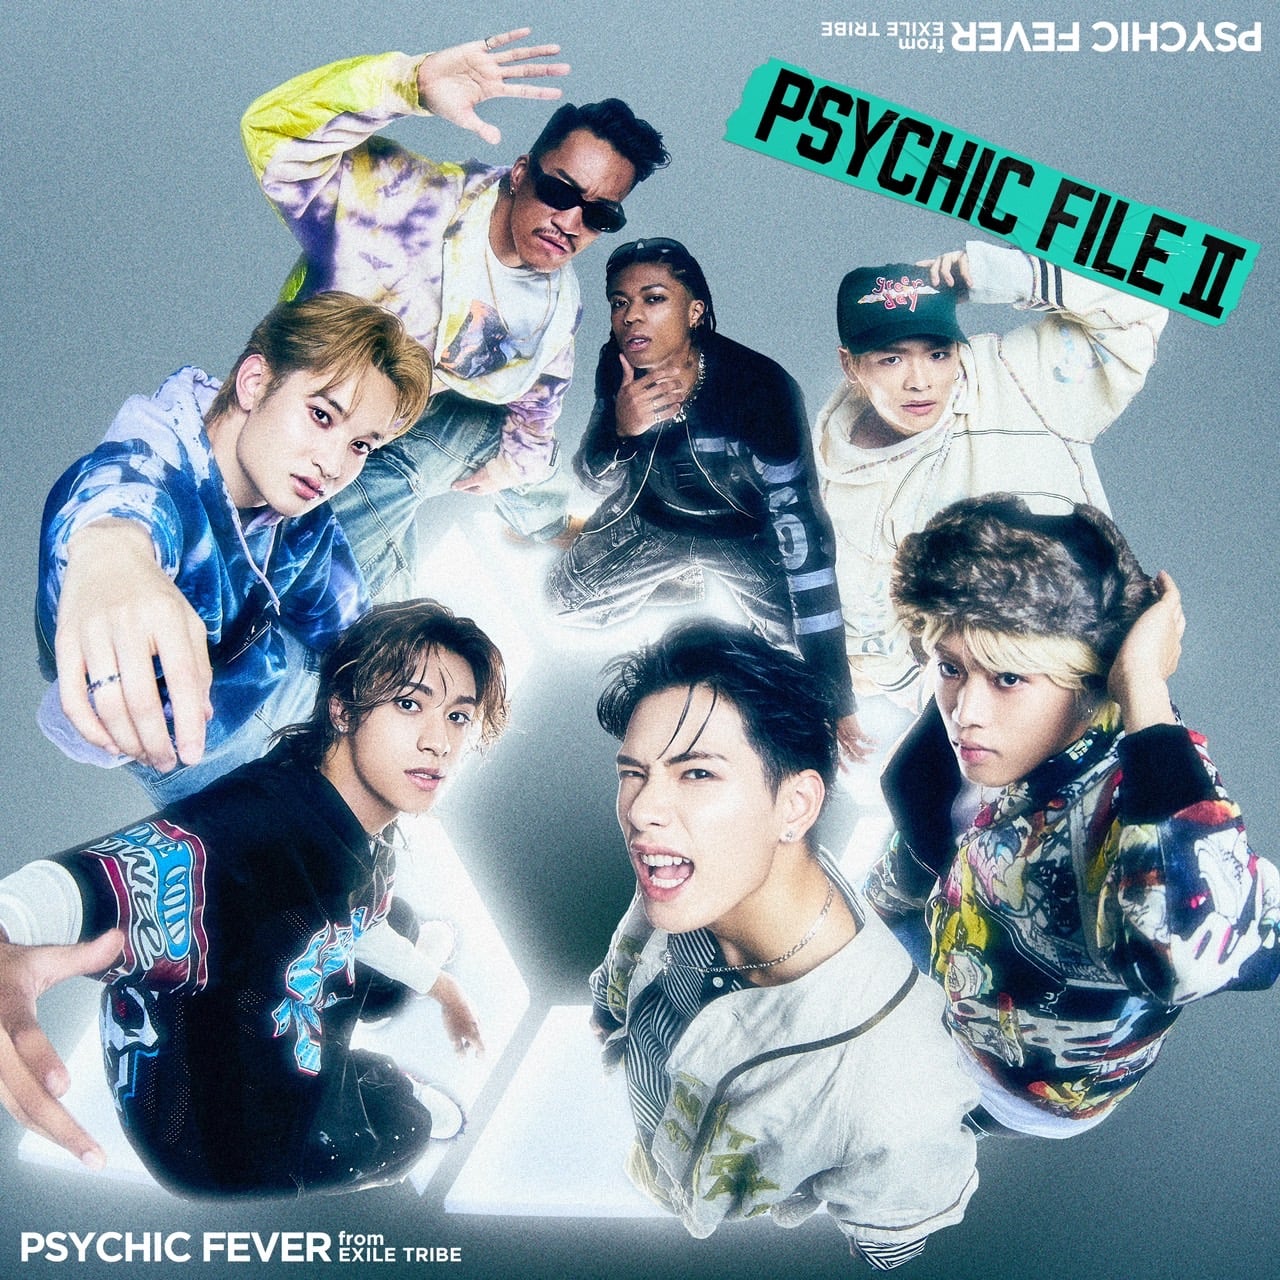 PSYCHIC FEVER from EXILE TRIBE PSYCHIC FILE II cover artwork